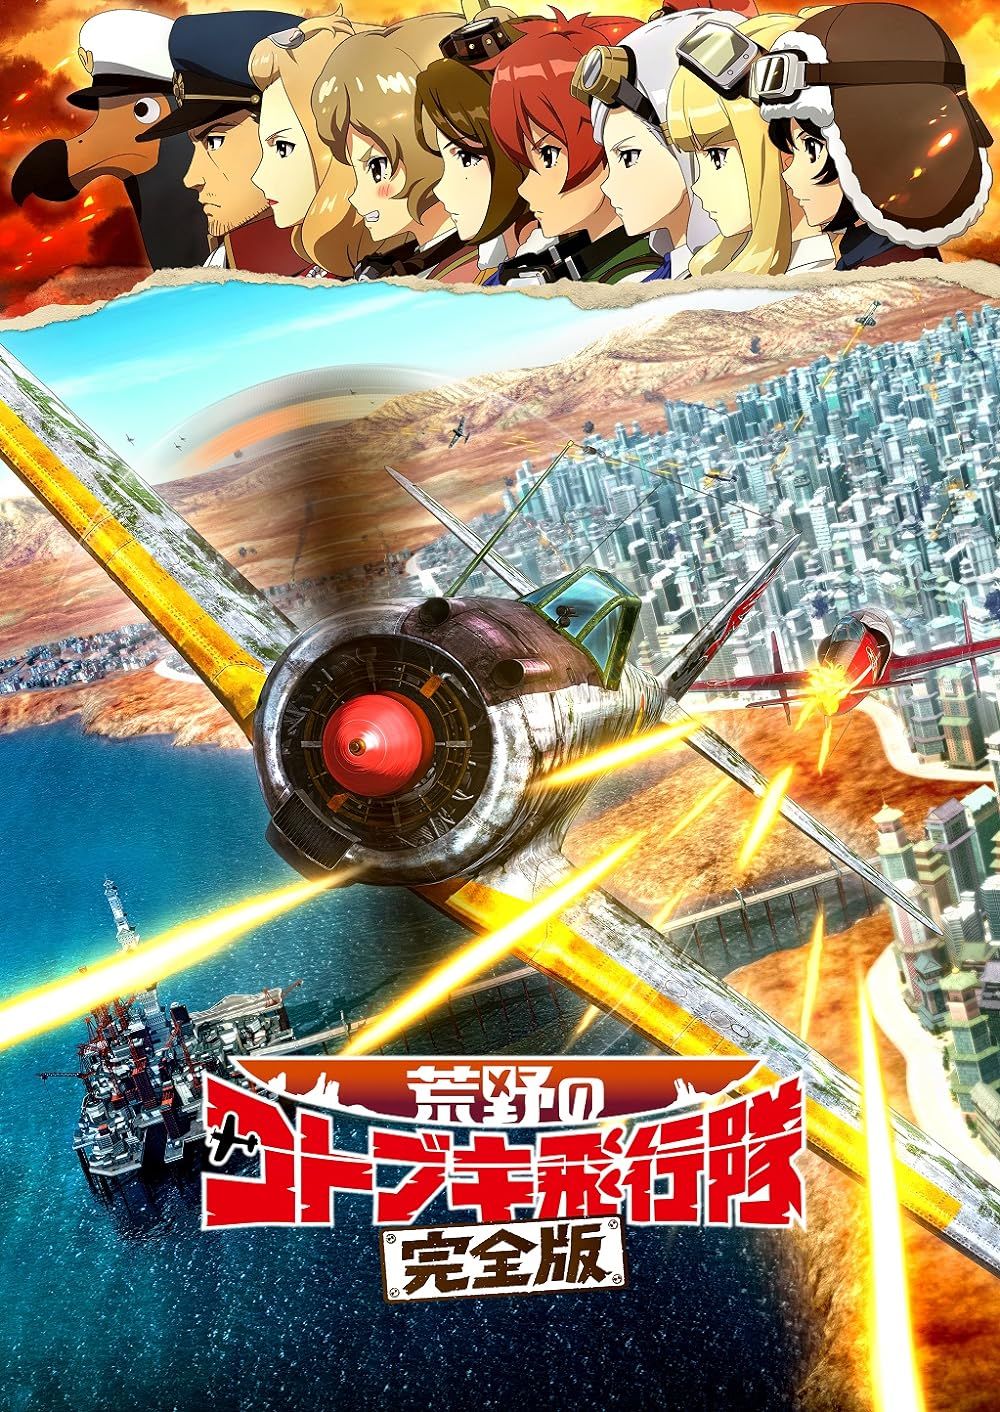 The Cast of The Magnificent KOTOBUKI Stand in Profile above an Image of Two Jets Fighting